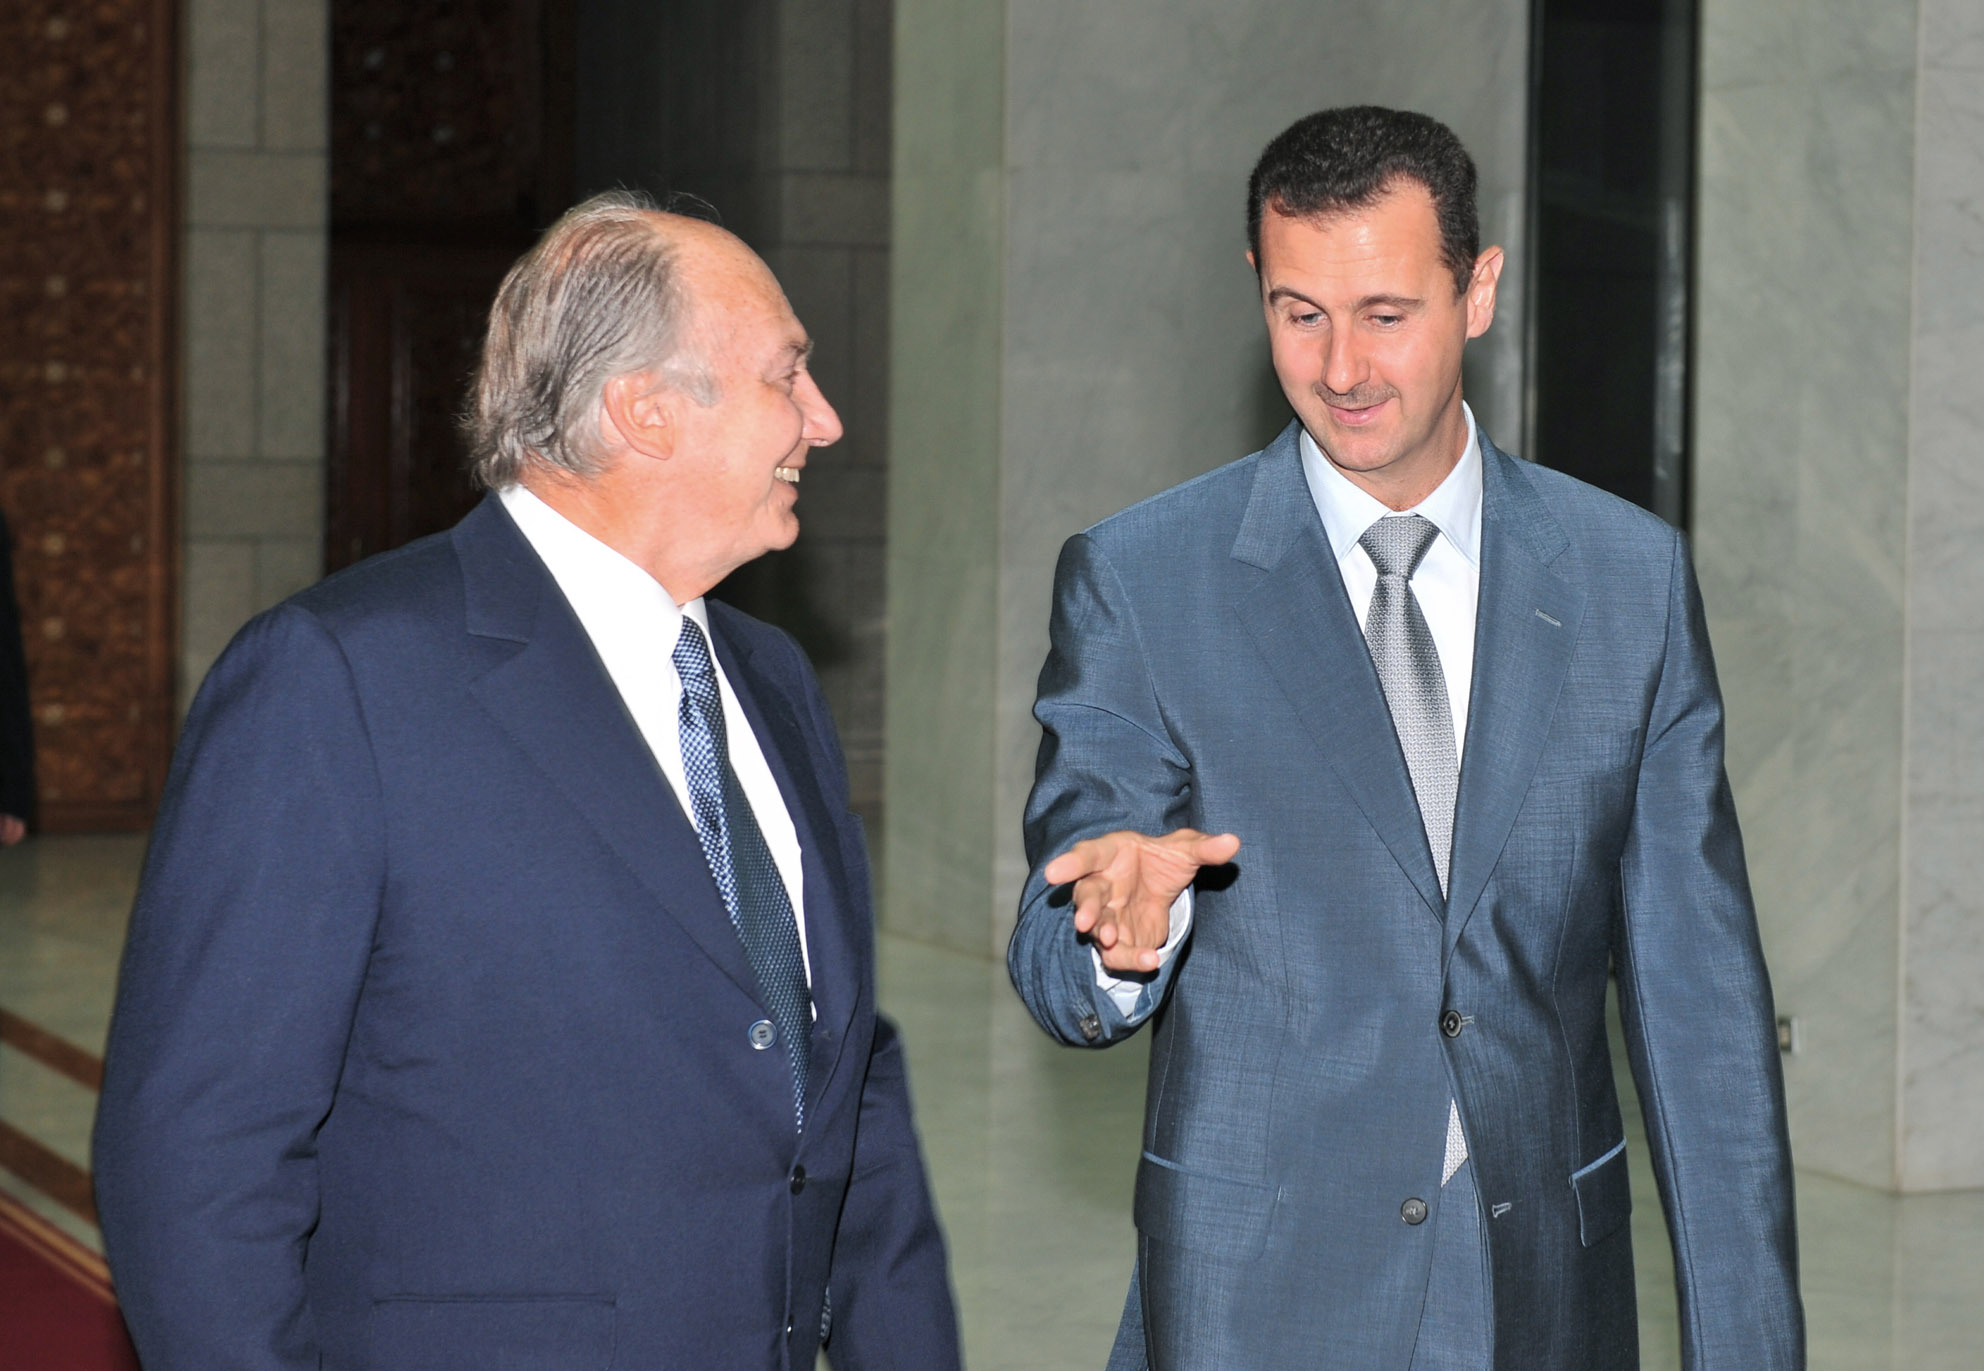 In the afternoon of the first day of his Golden Jubilee visit to Syria, Mawlana Hazar Imam met with the President, His Excellency Dr Bashar Al-Assad, in Damascus. Photo: Syrian Arab News Agency (SANA)